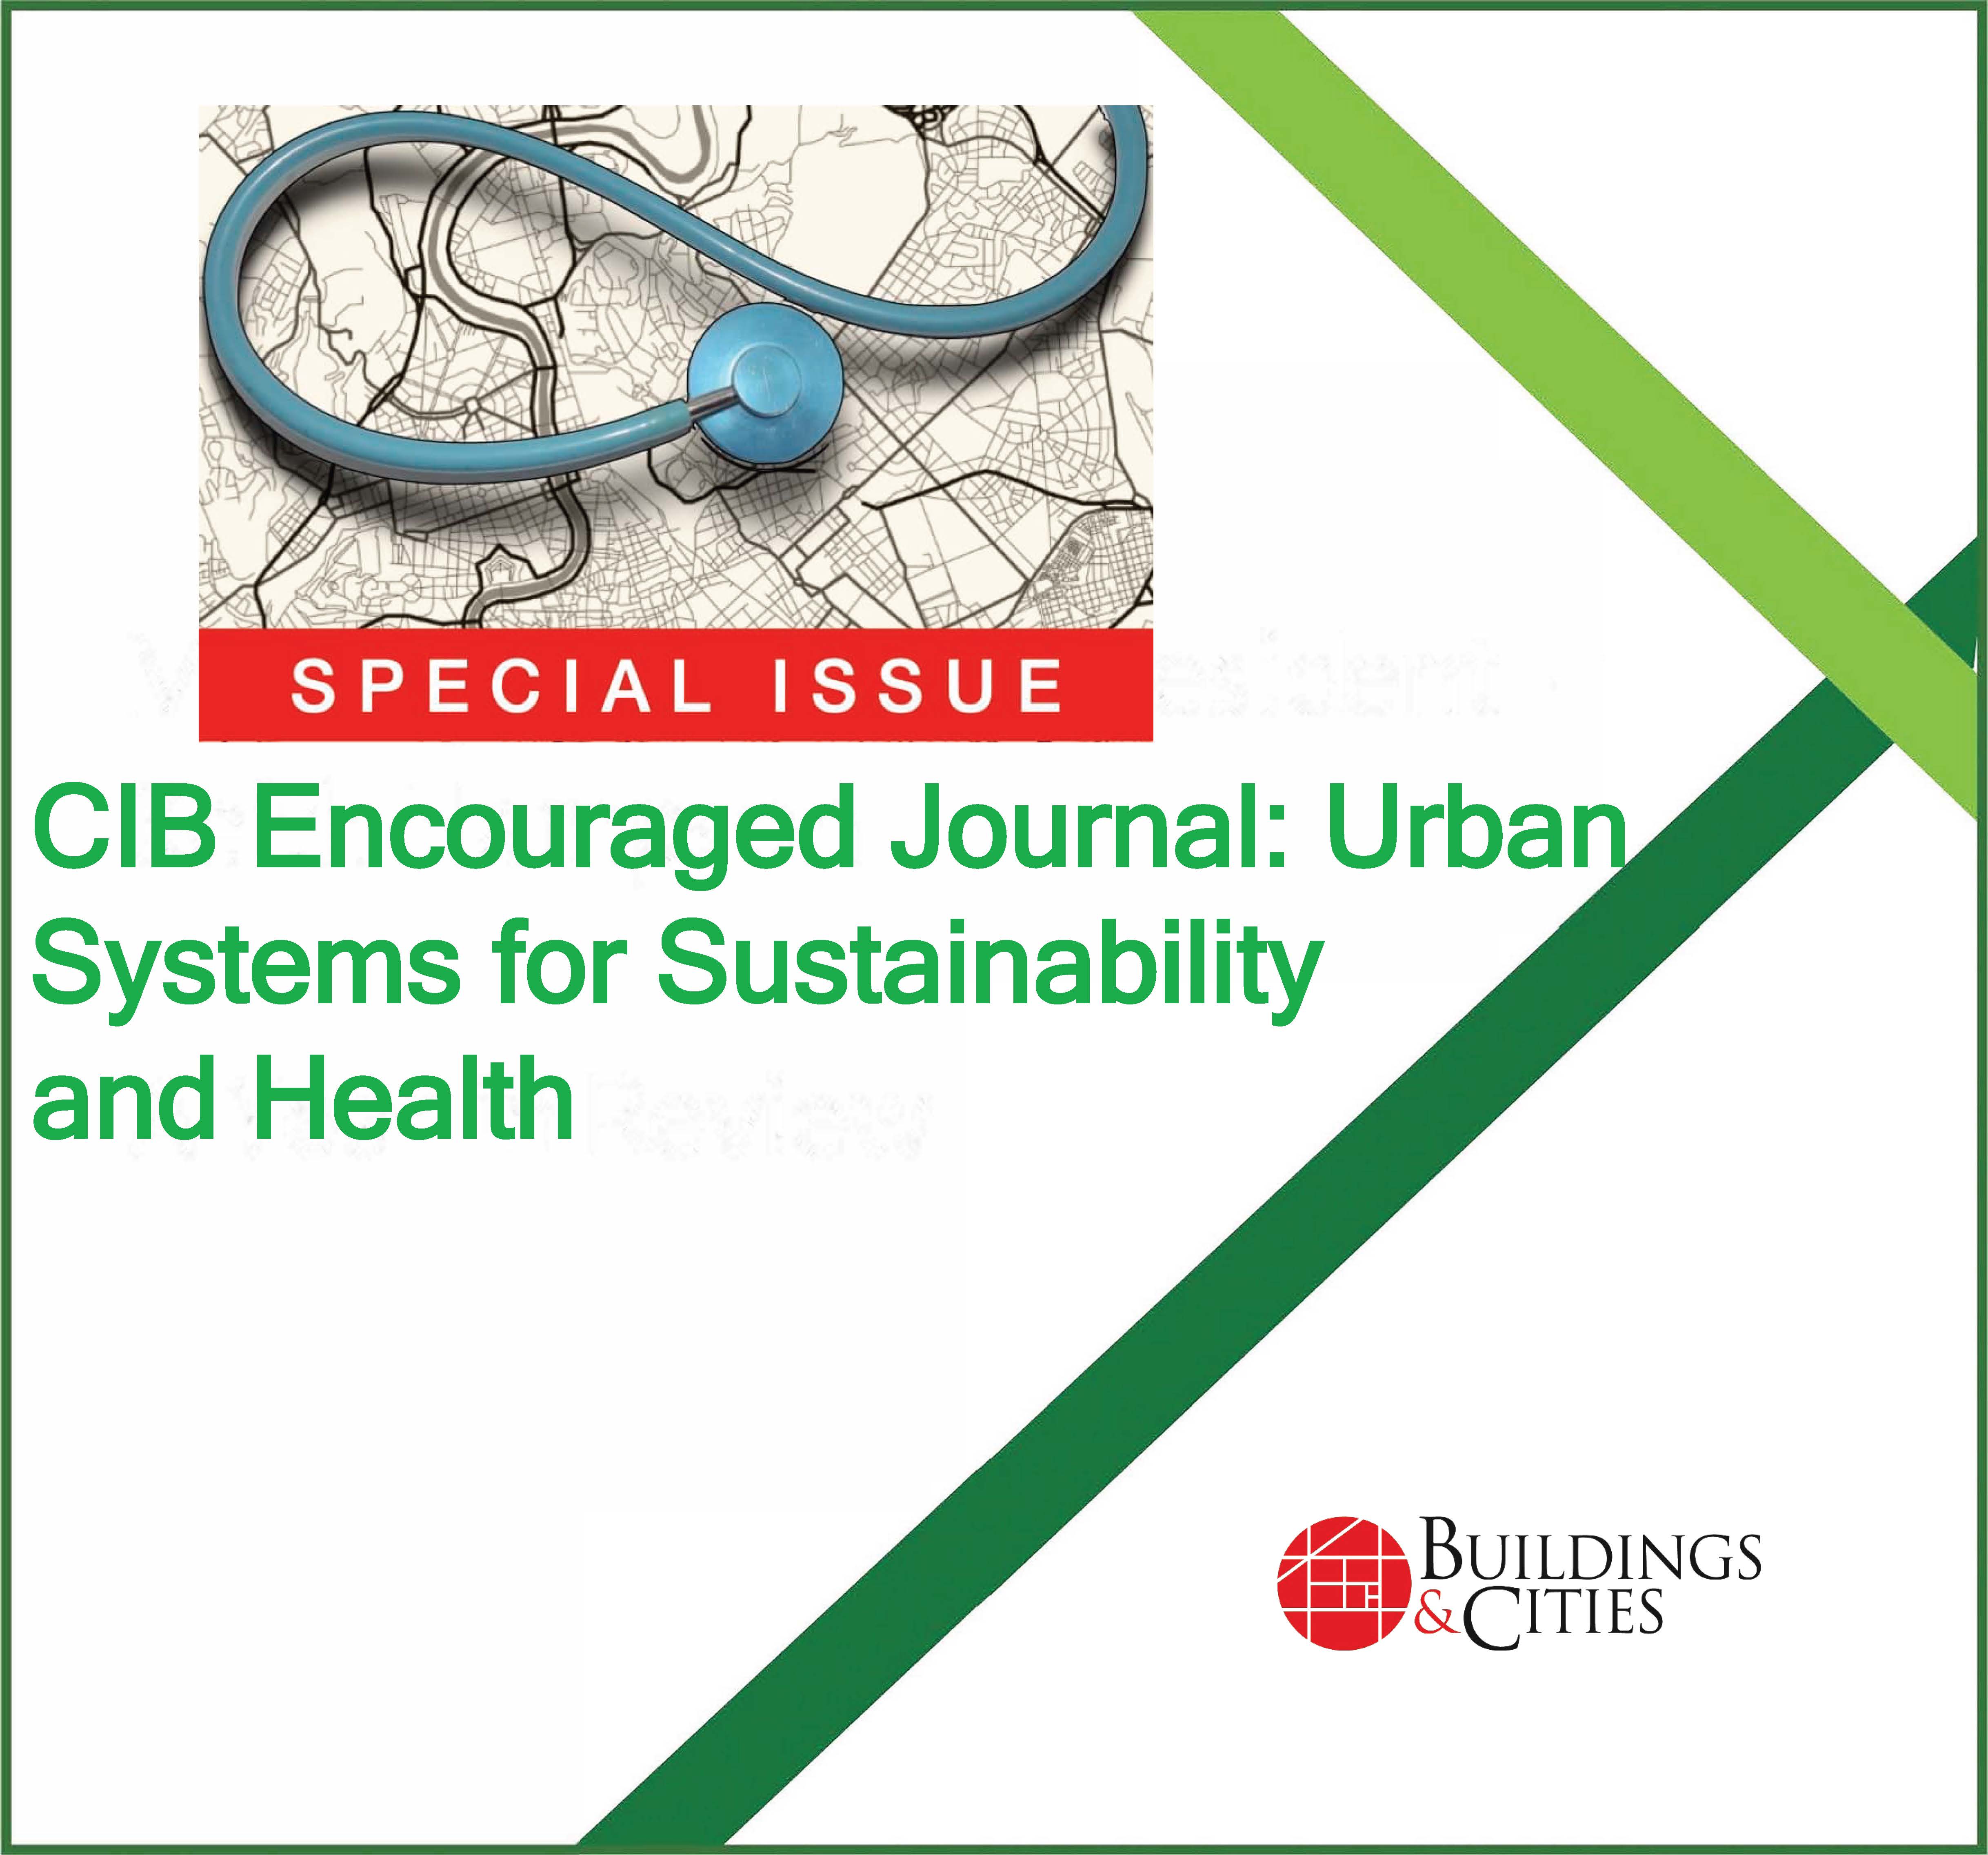 Urban Systems for Sustainability and Health